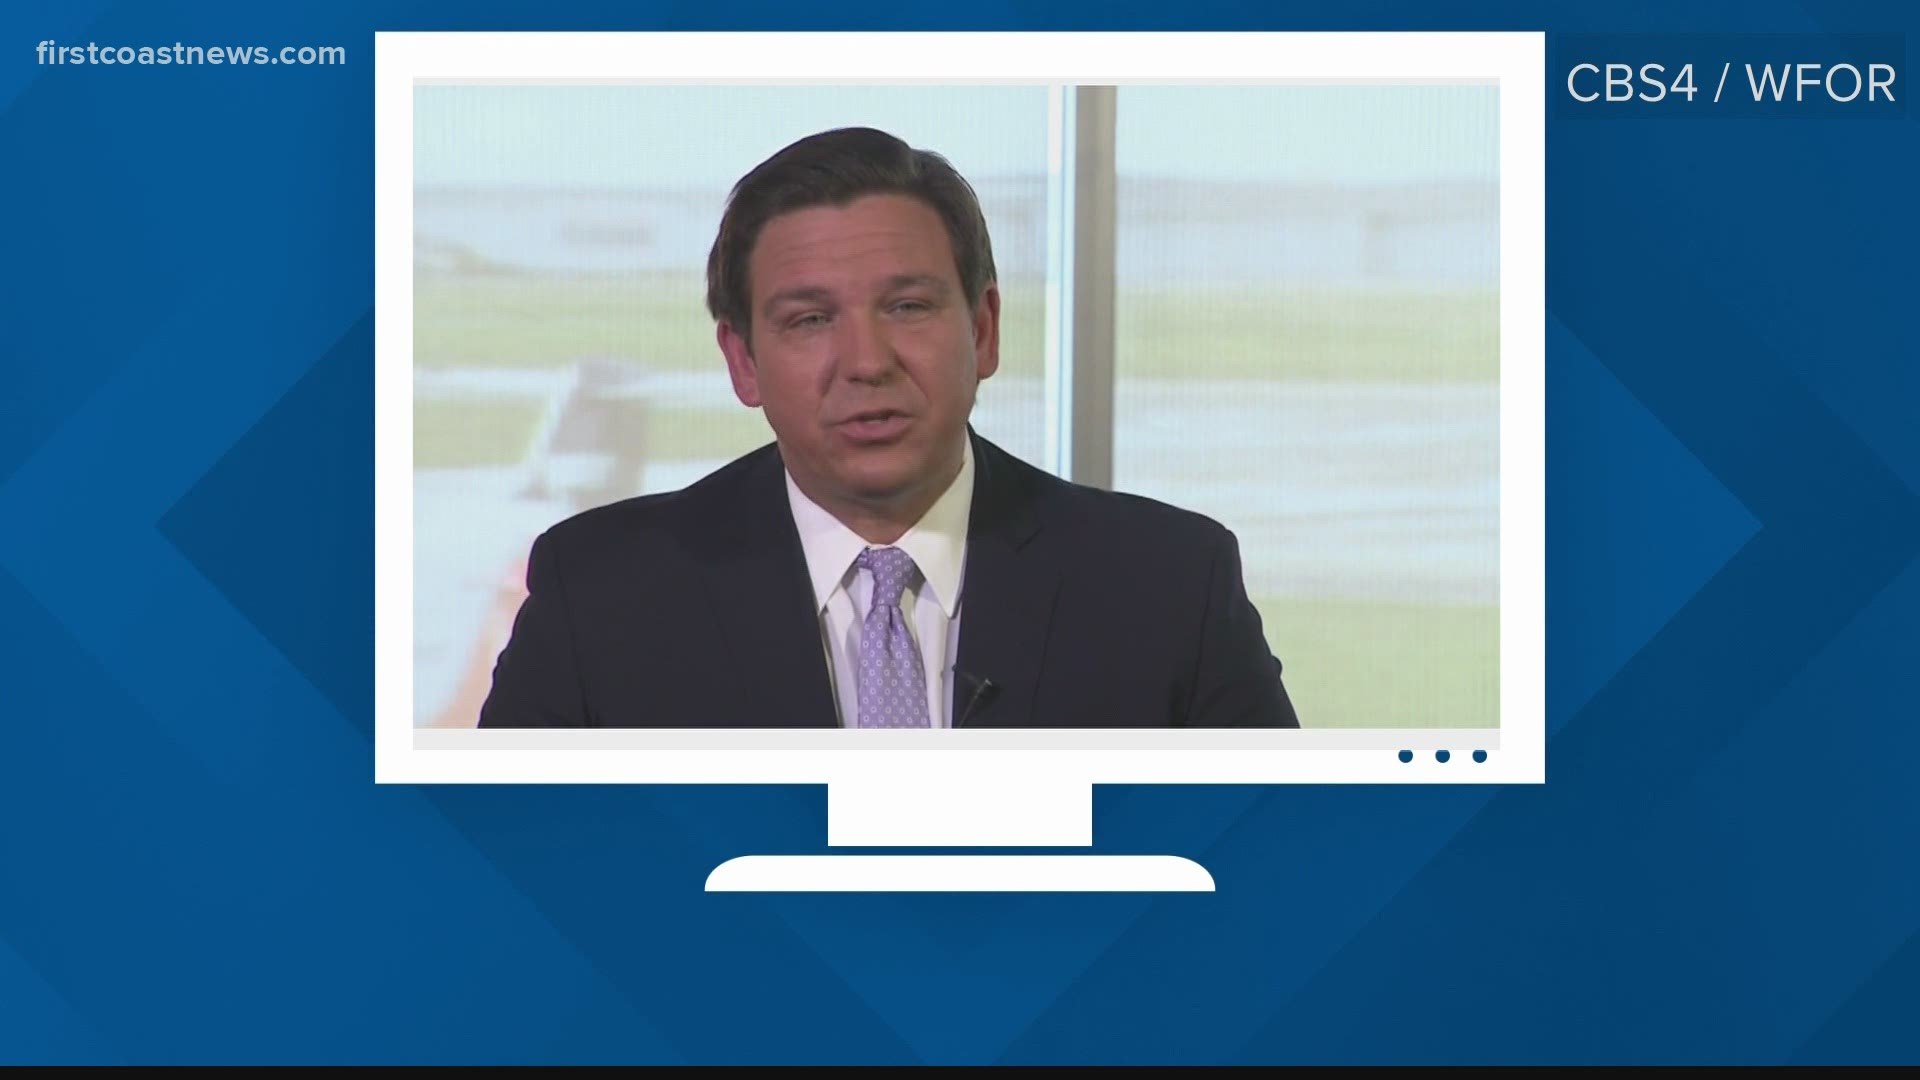 Gov. DeSantis was interviewed by a TV station in Miami and said the state's unemployment system was designed to pay out the "least number of claims."